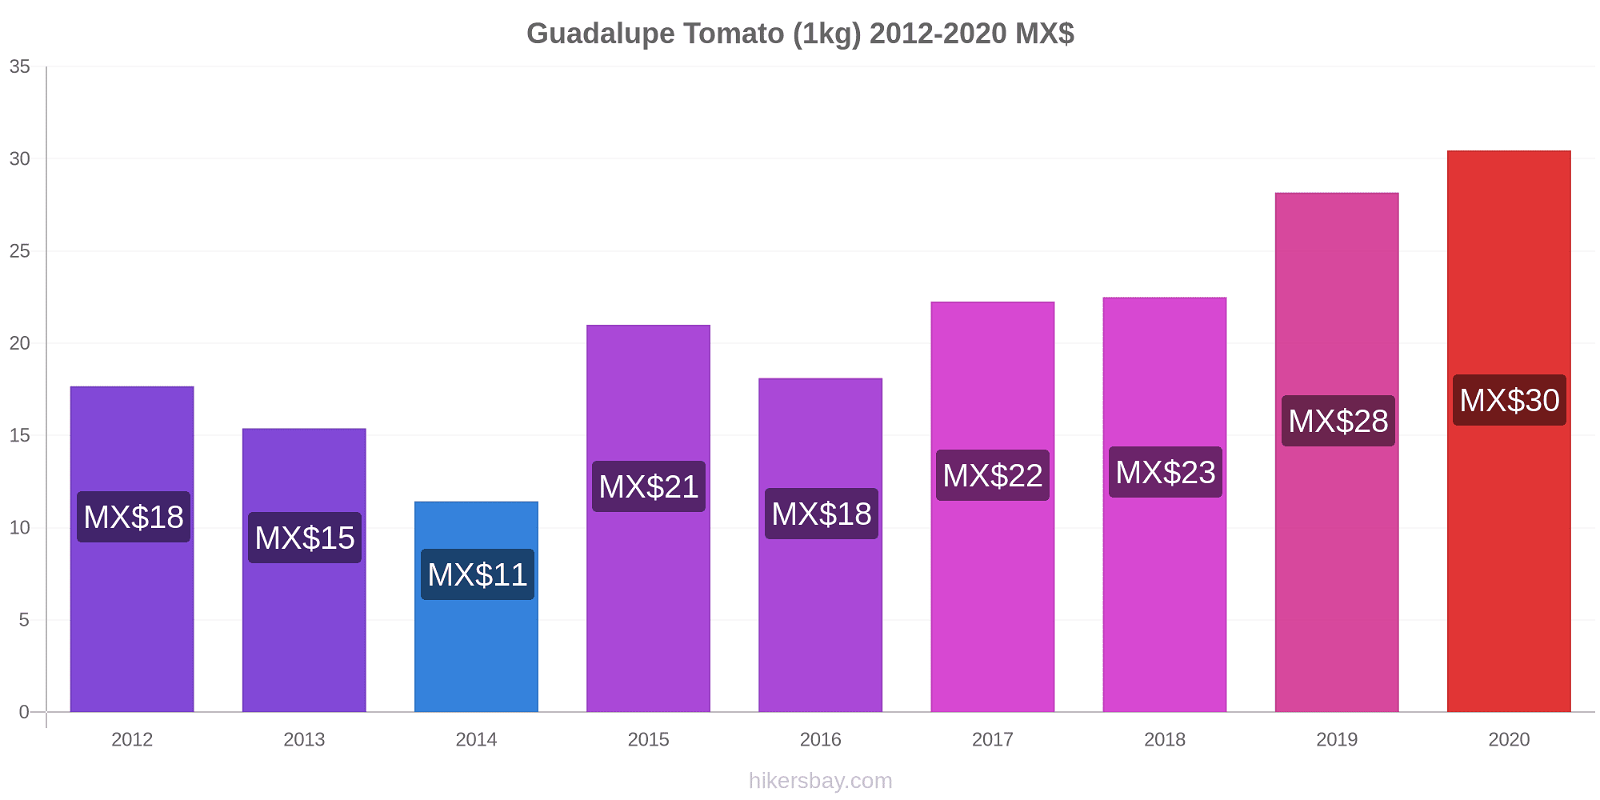 Guadalupe price changes Tomato (1kg) hikersbay.com